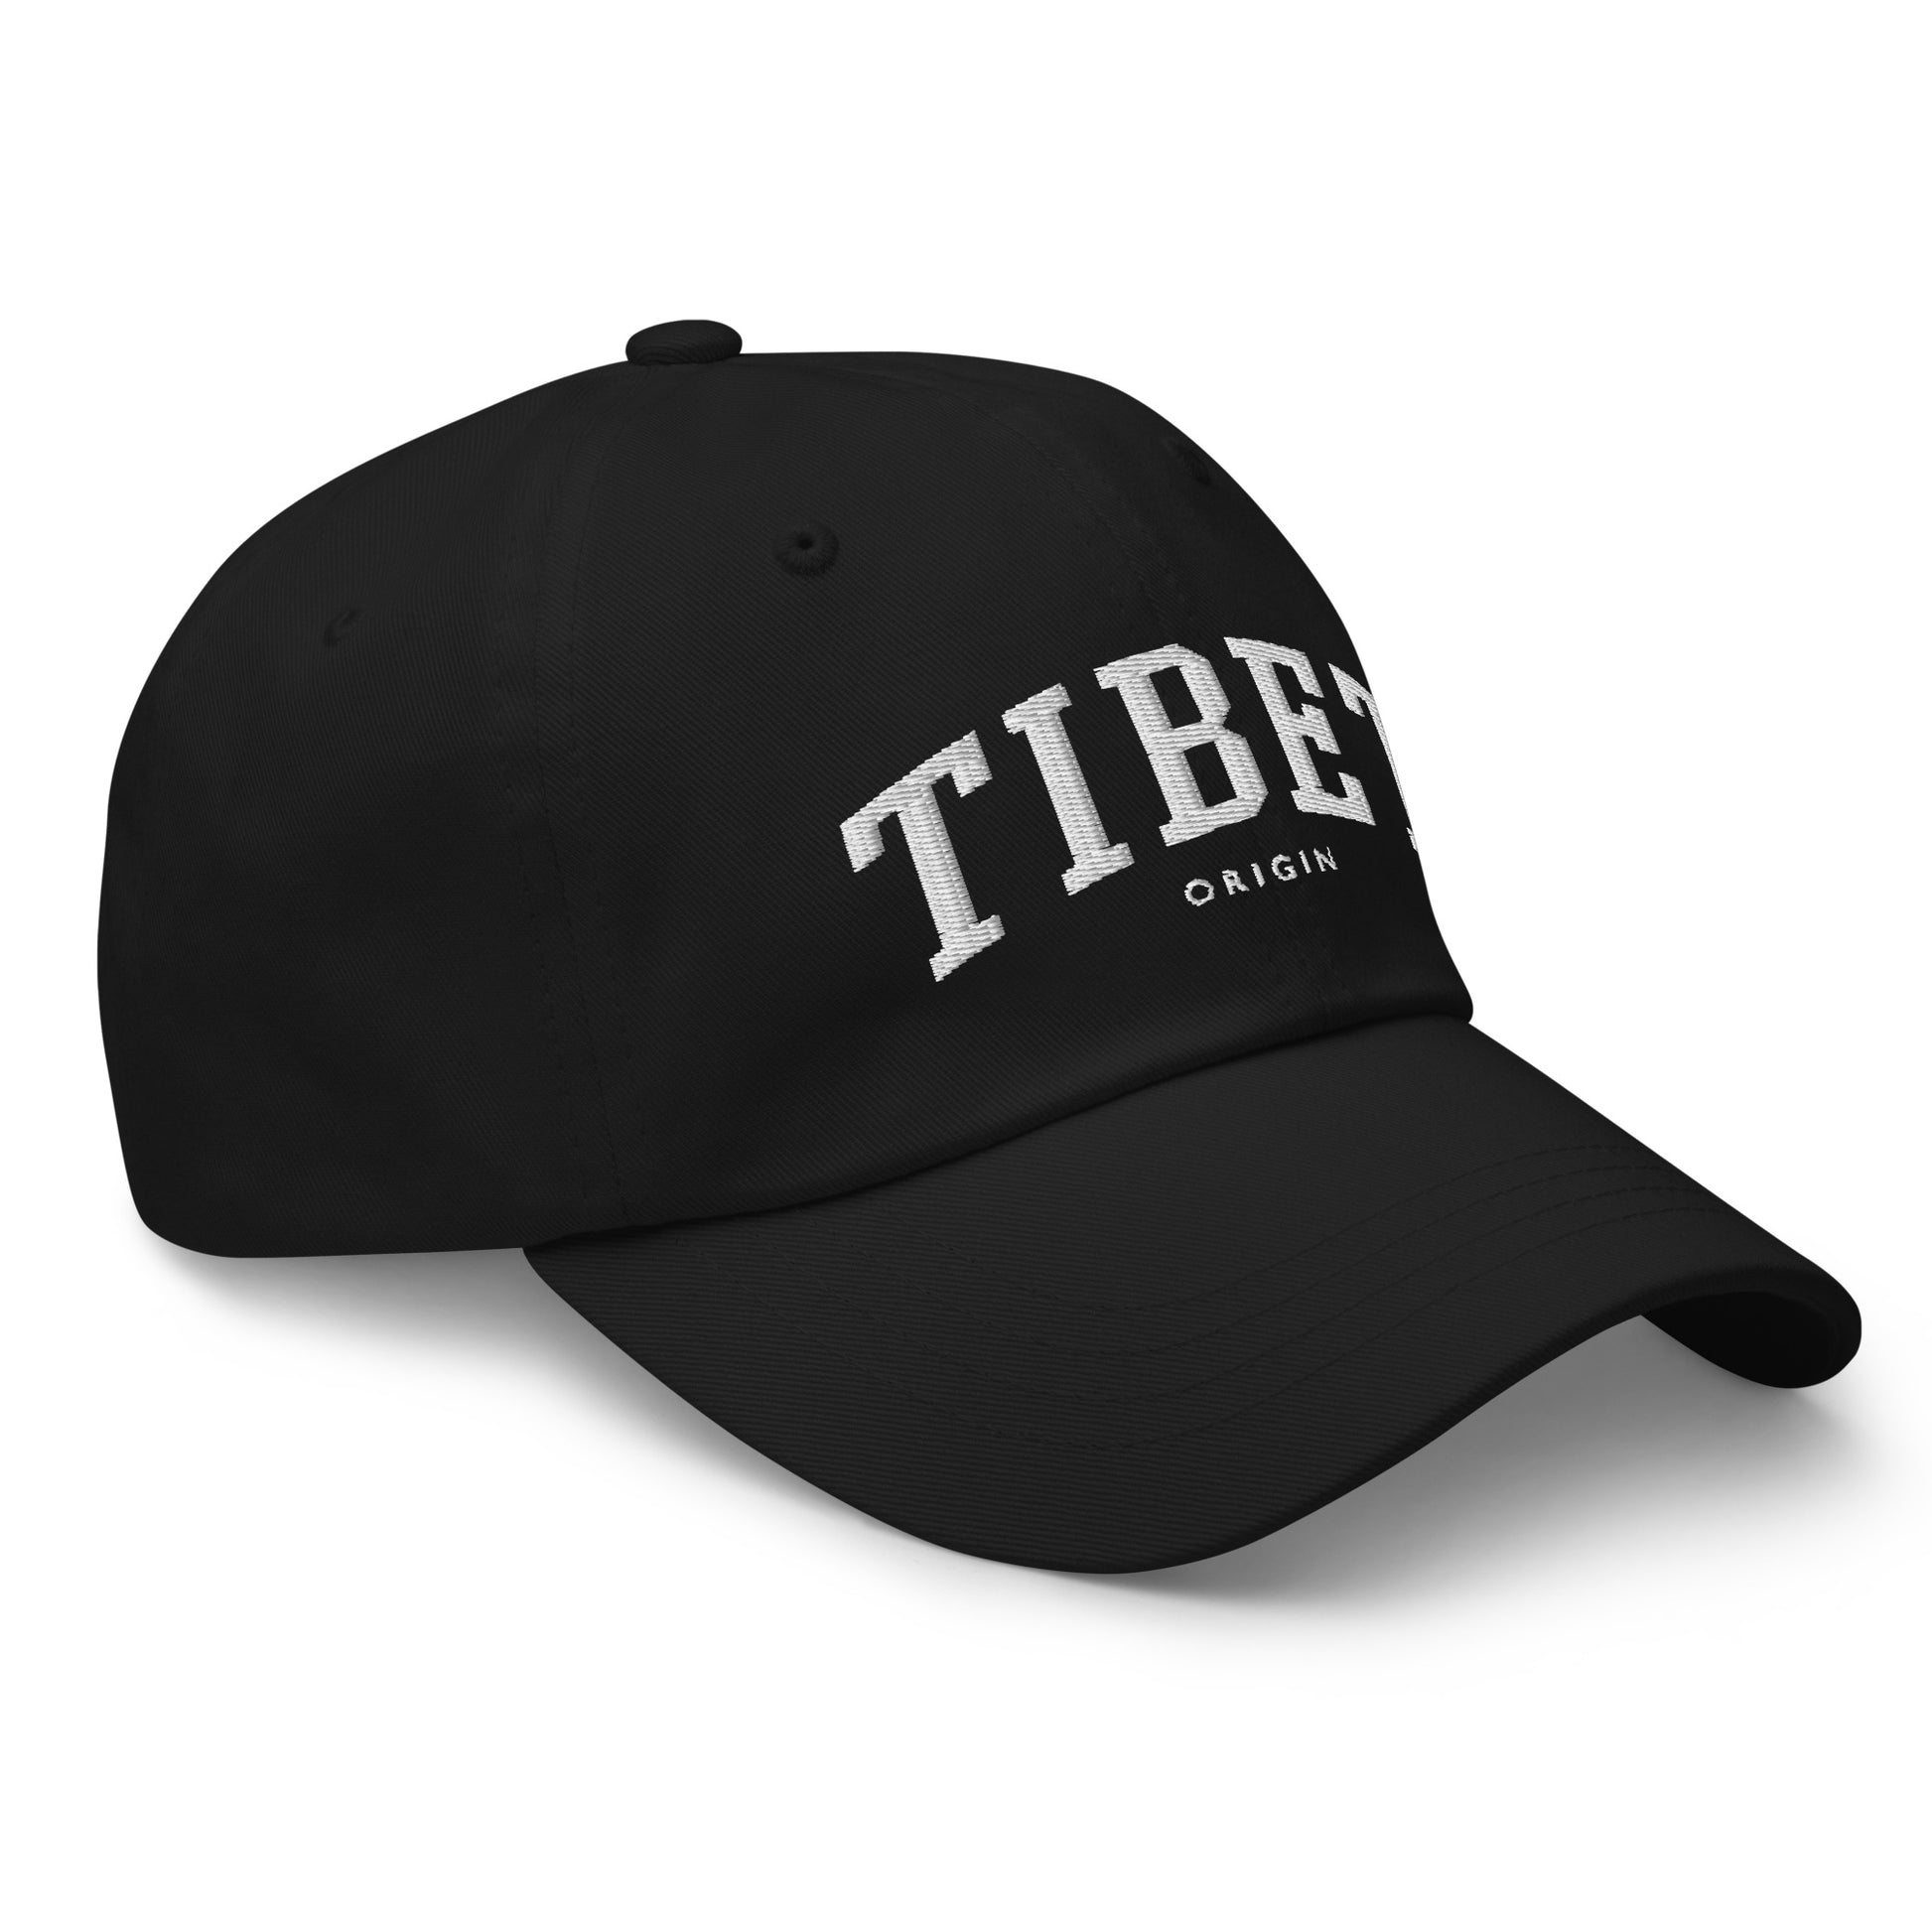 TIBET ORIGIN HATS are curated and designed under Dzimig Studios' Tibet Archive Project. The hats come in various colors to match your style and sits on your head just like a crow. Each hat are embroidered and are available in four distinct colors of your choice.